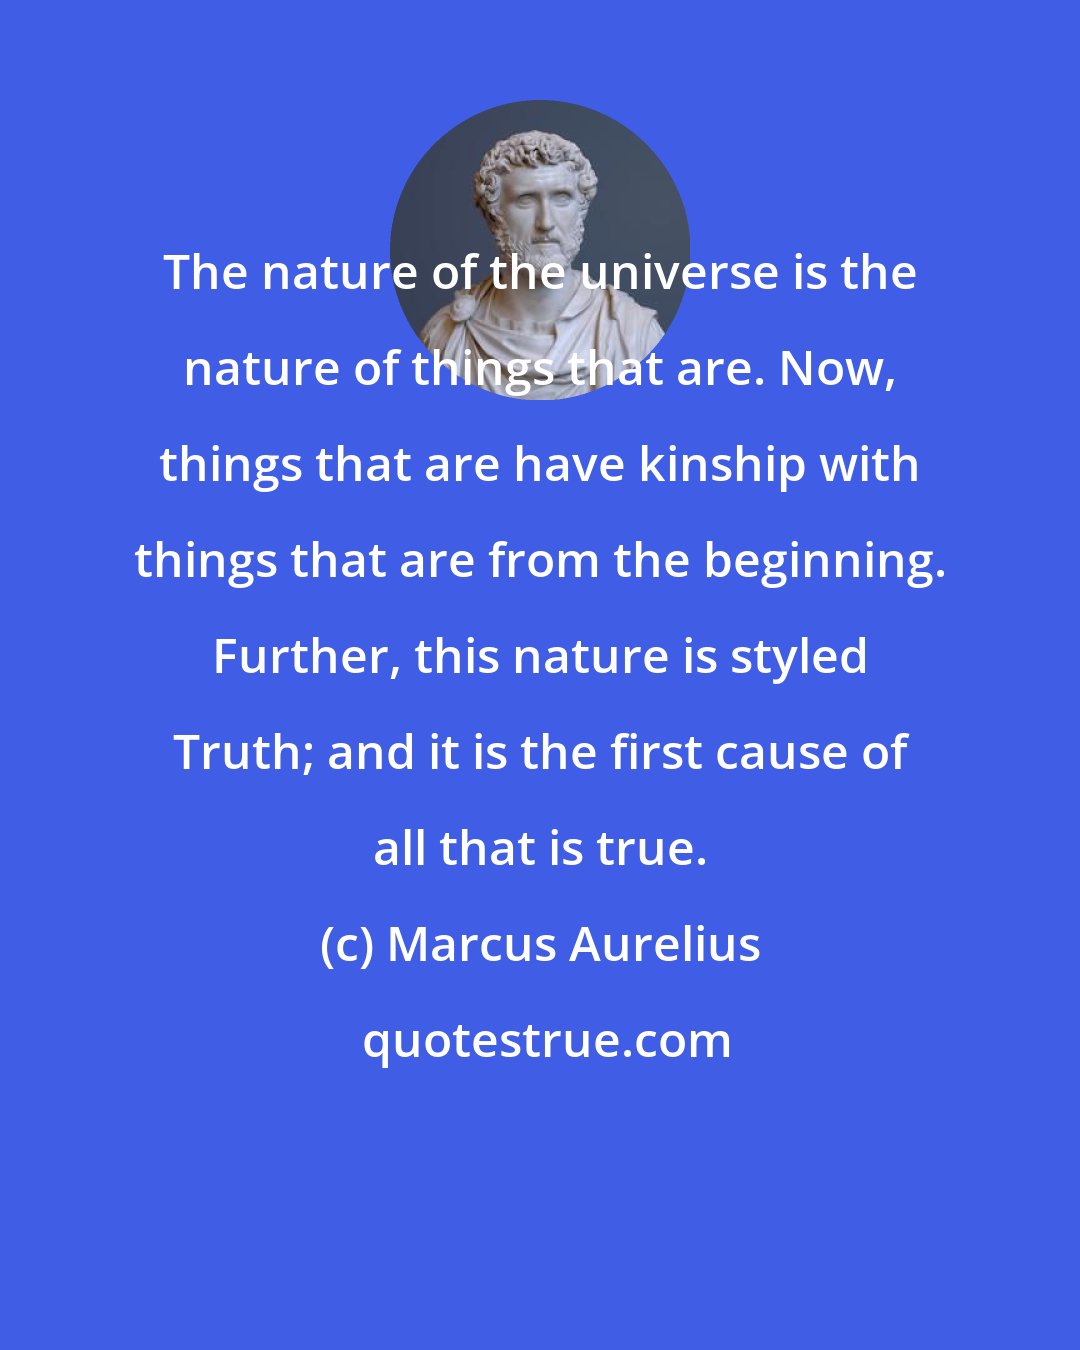 Marcus Aurelius: The nature of the universe is the nature of things that are. Now, things that are have kinship with things that are from the beginning. Further, this nature is styled Truth; and it is the first cause of all that is true.